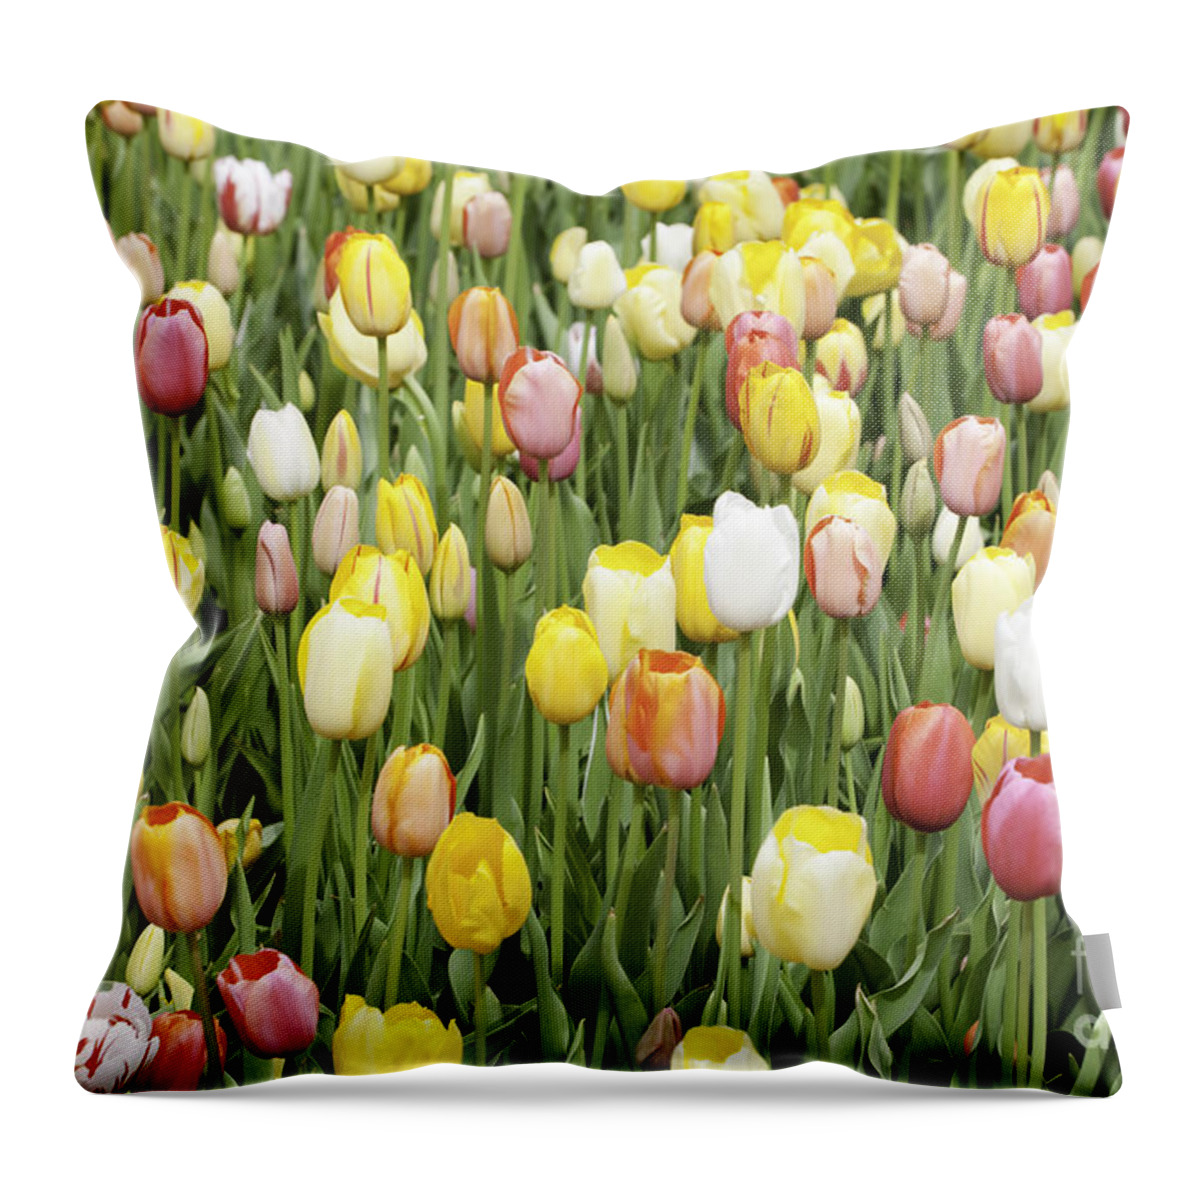 Garden Throw Pillow featuring the photograph Tulip Garden #1 by Anthony Totah